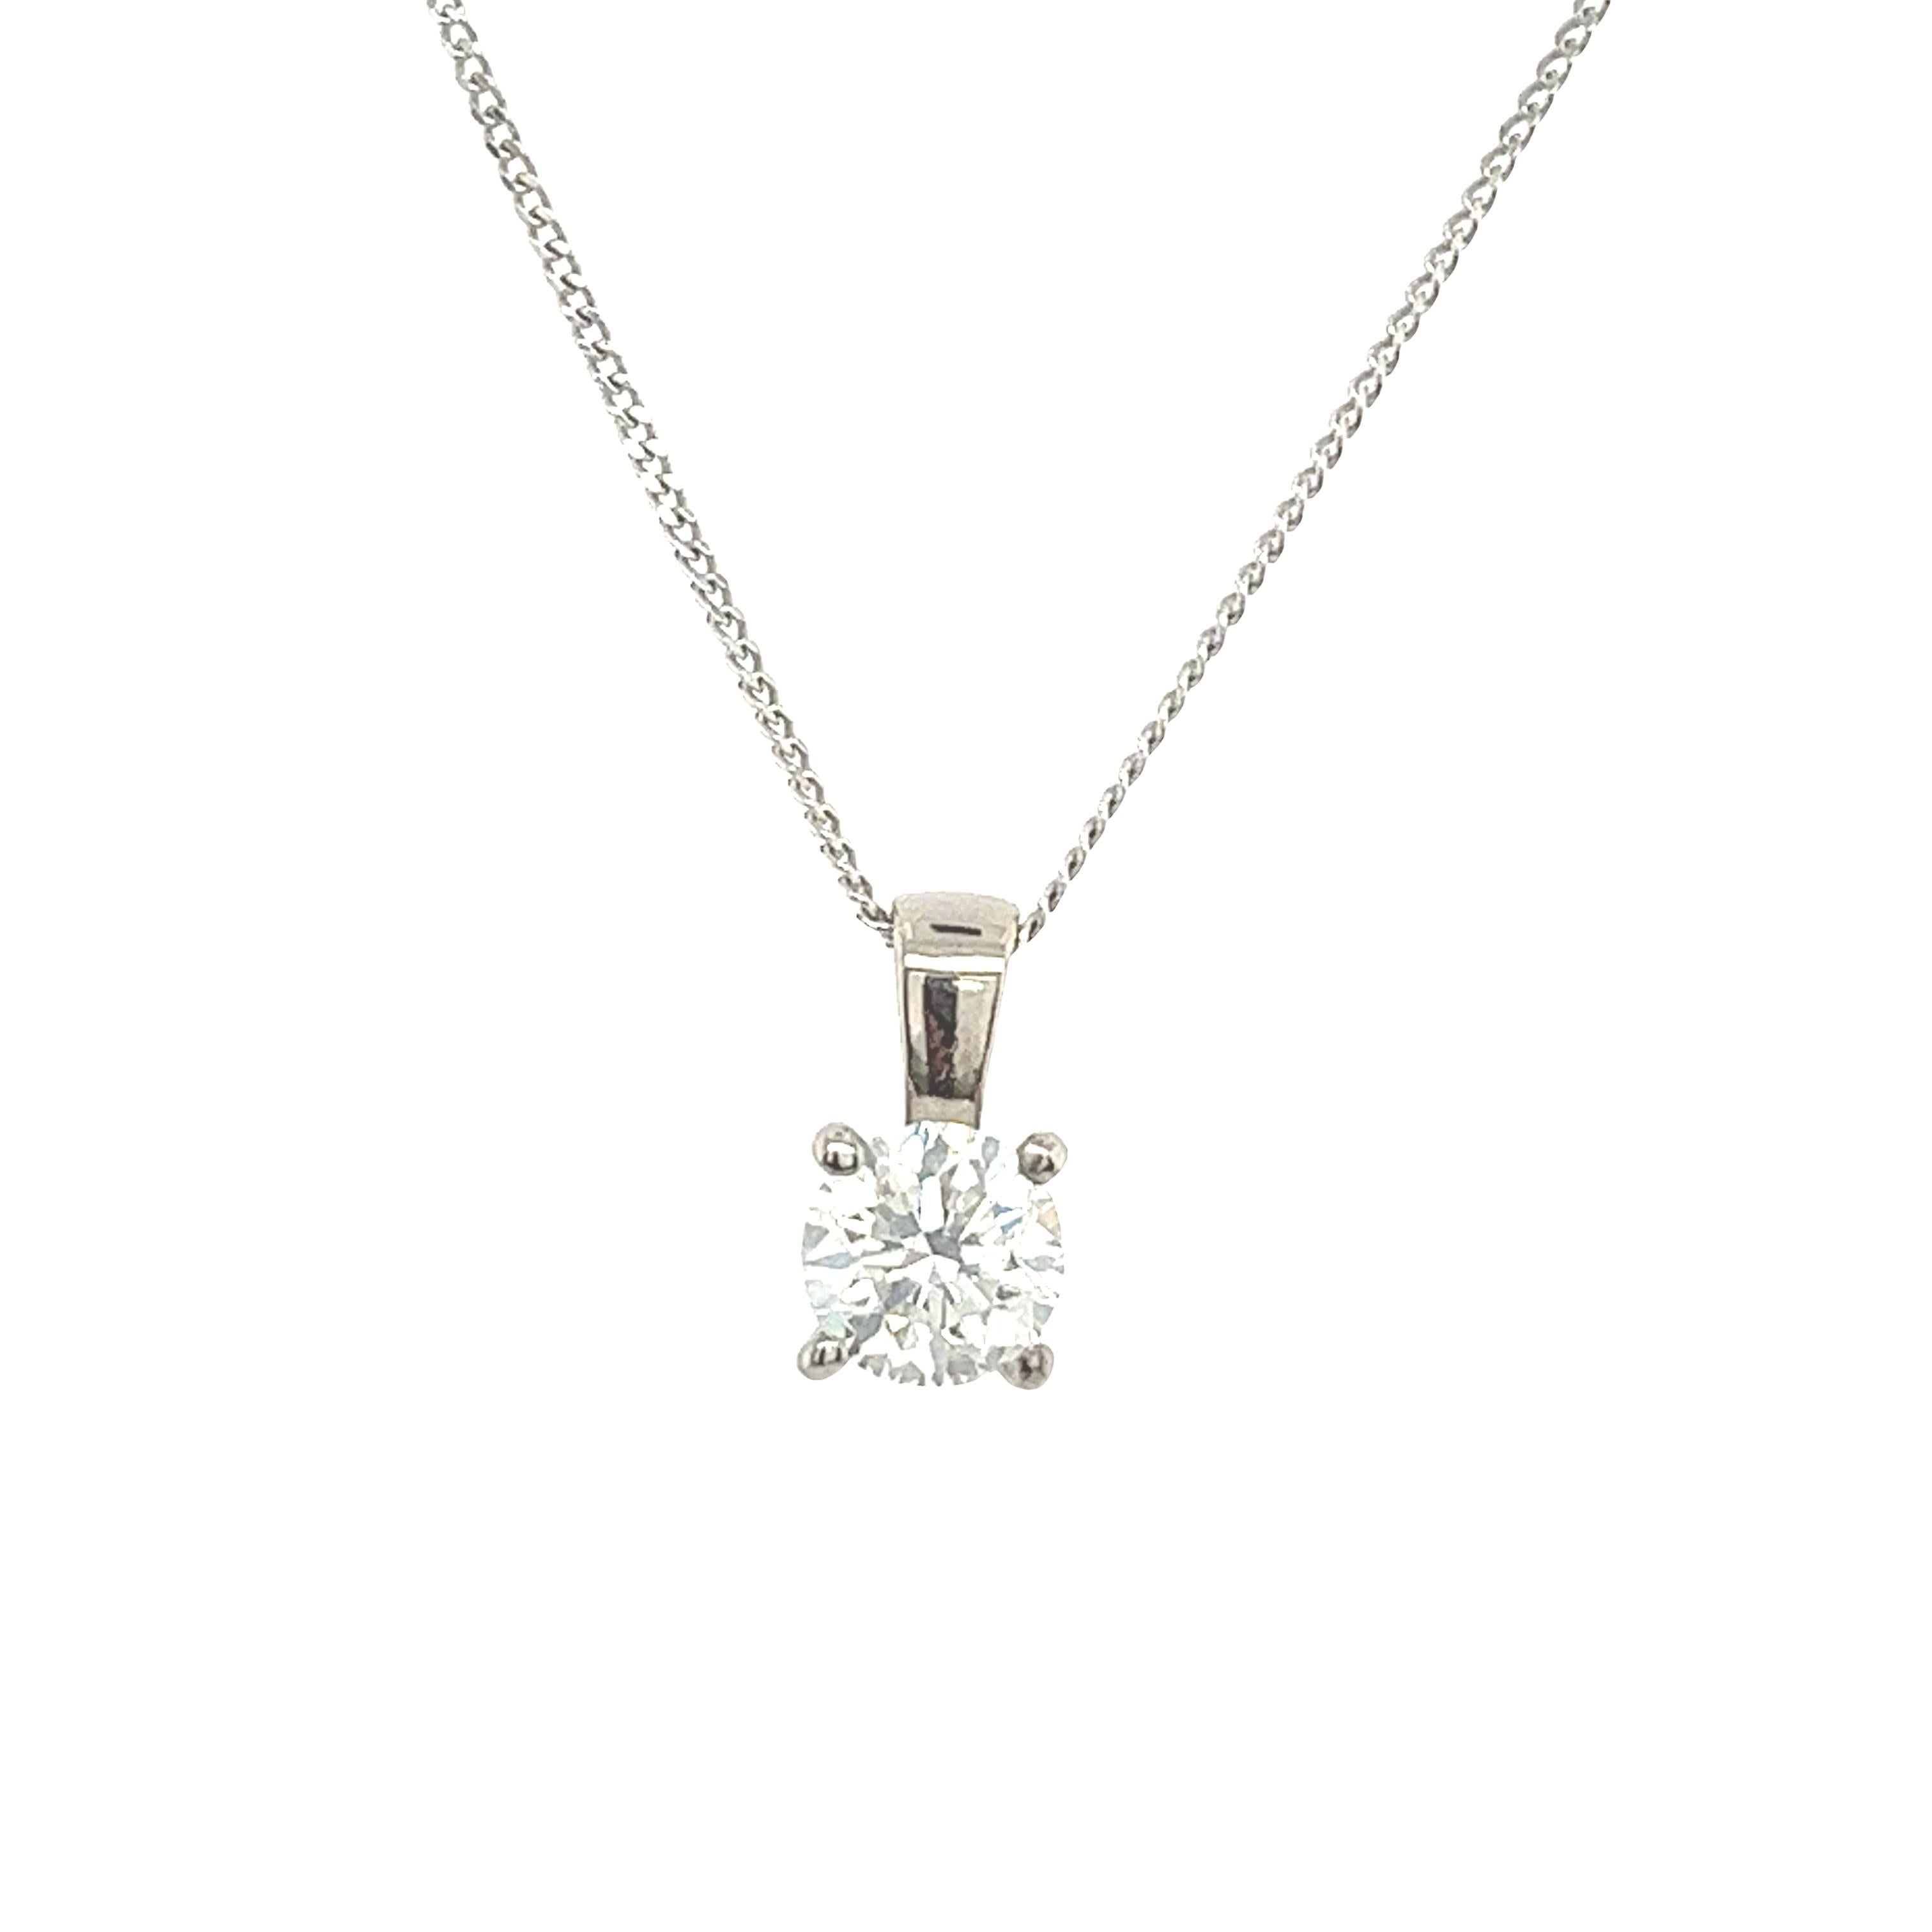 Round Cut 18ct White Gold Diamond Pendant, Suspended from 18